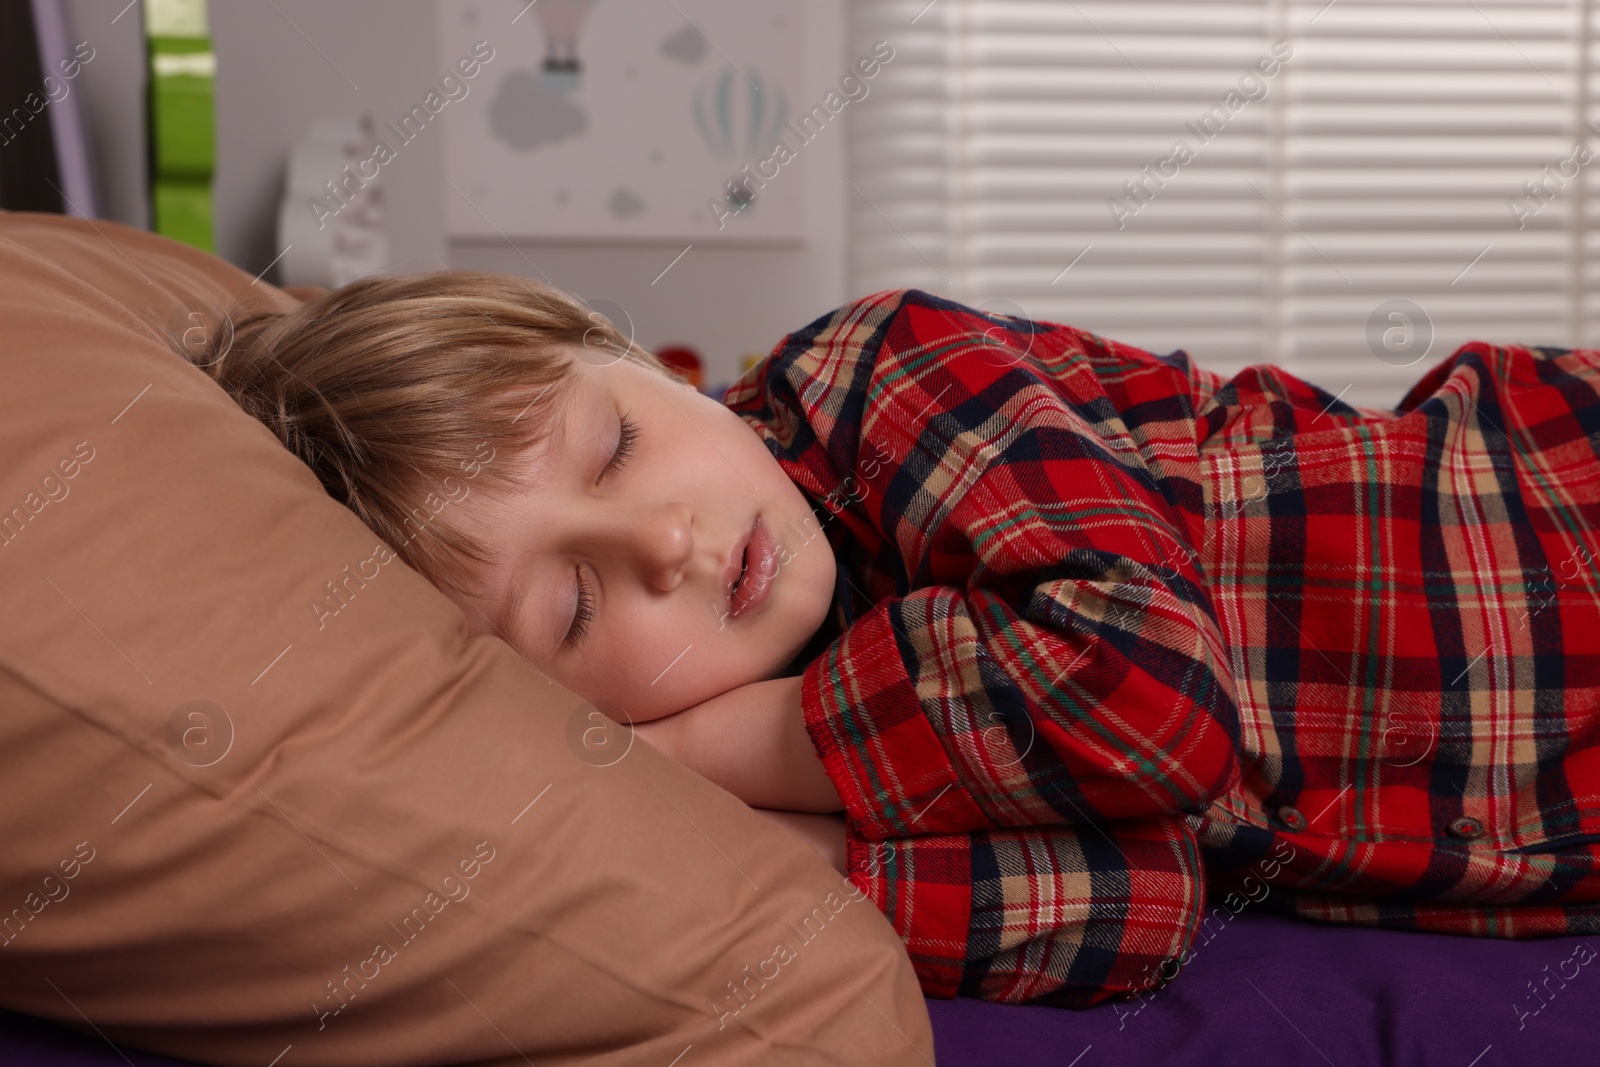 Photo of Little boy snoring while sleeping in bed at home